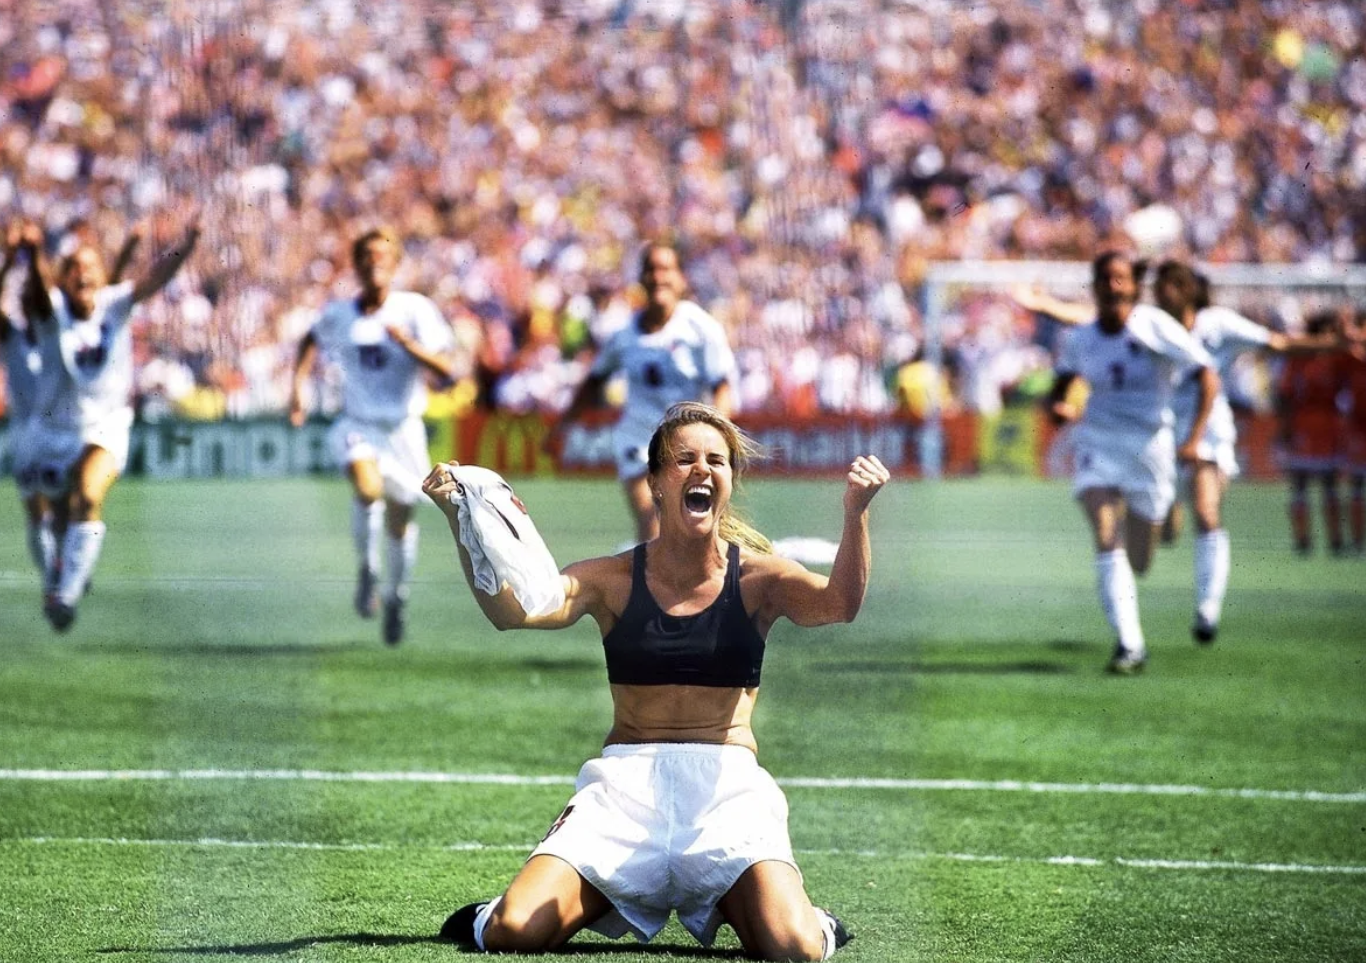 Women's World Cup, 1999. Brandi Chastain wins it all for the United States. Photo by: Robert Beck/Sports Illustrated.